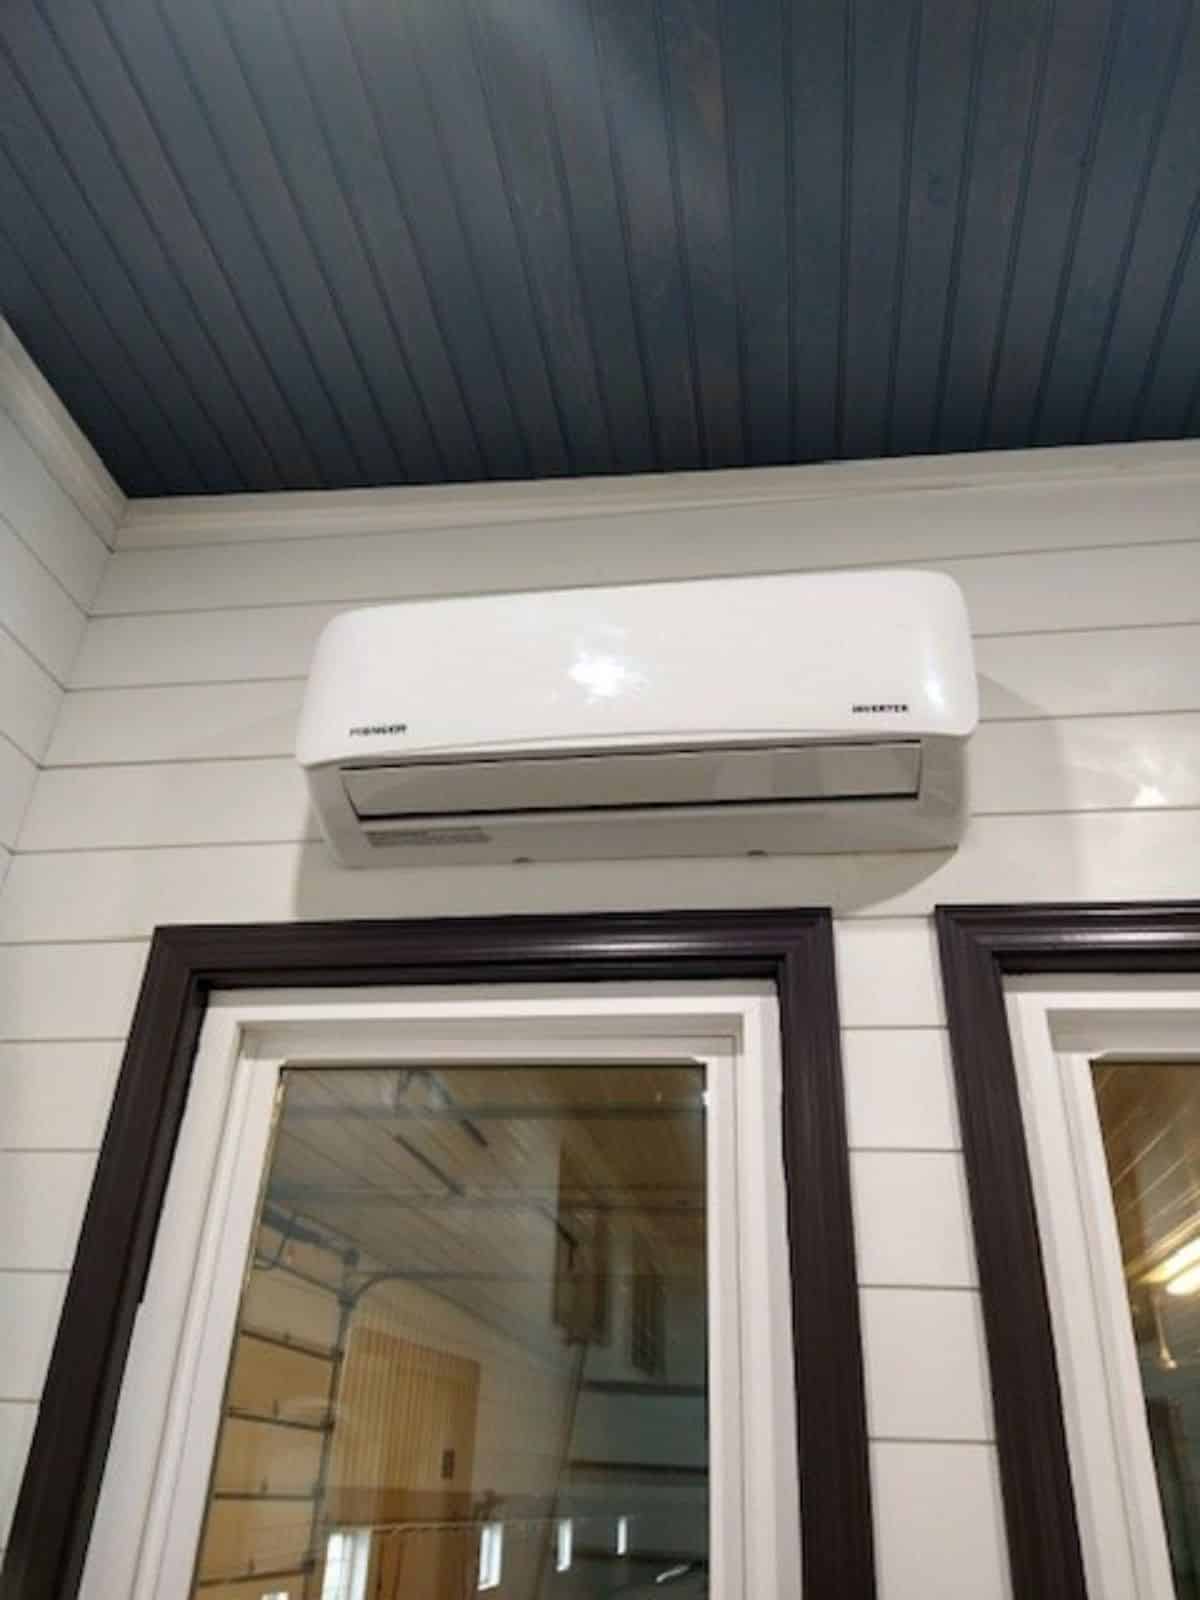 Split air condition unit is also installed and included in the deal